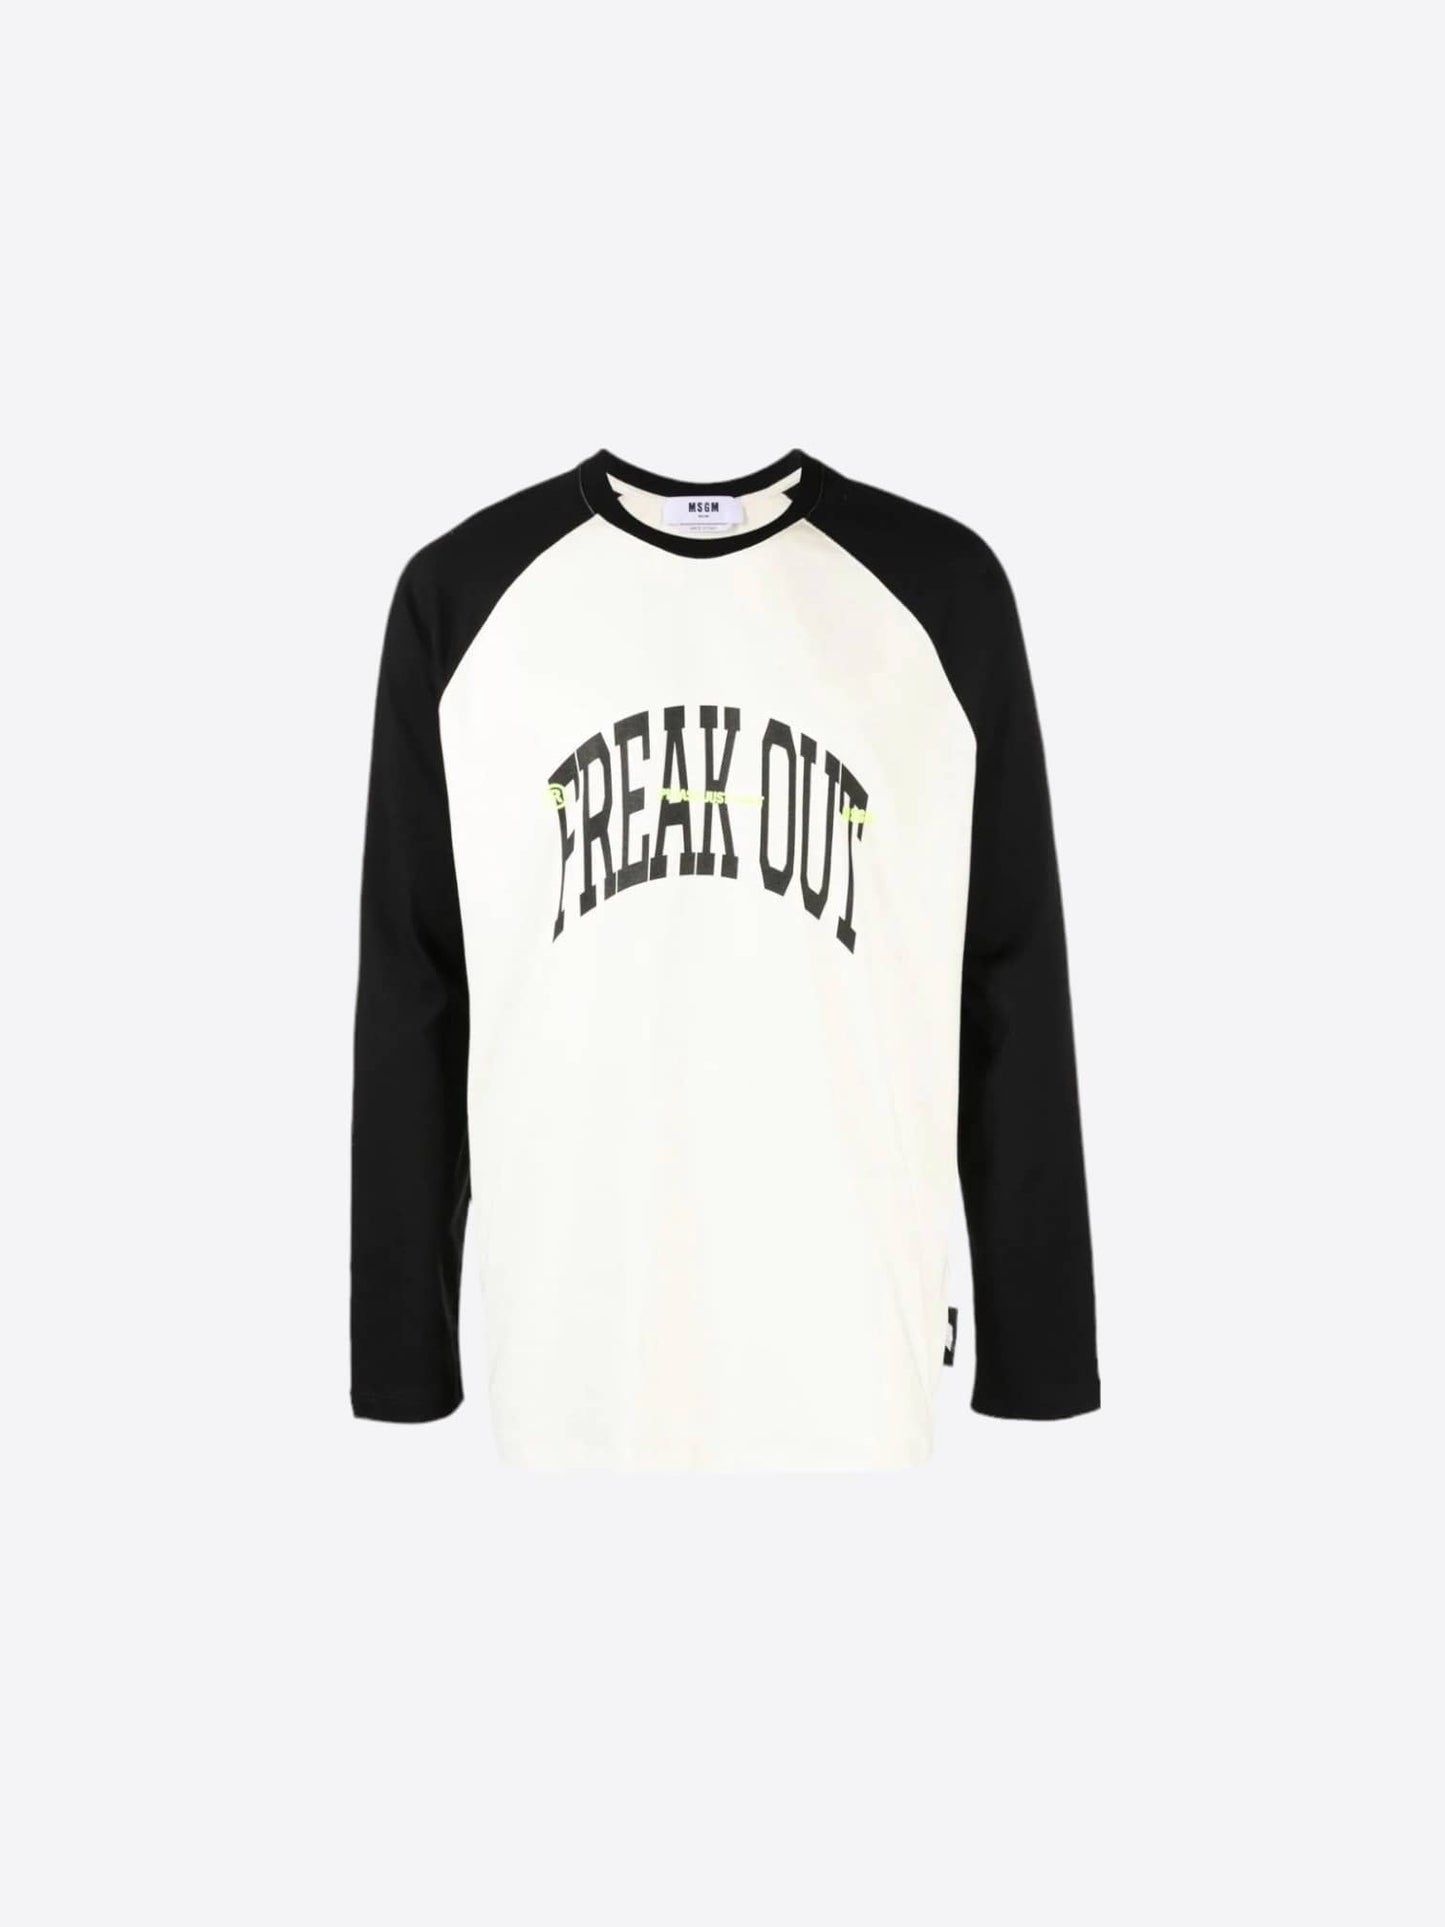 "Freak Out” Two-Tone Long-Sleeved T-Shirt